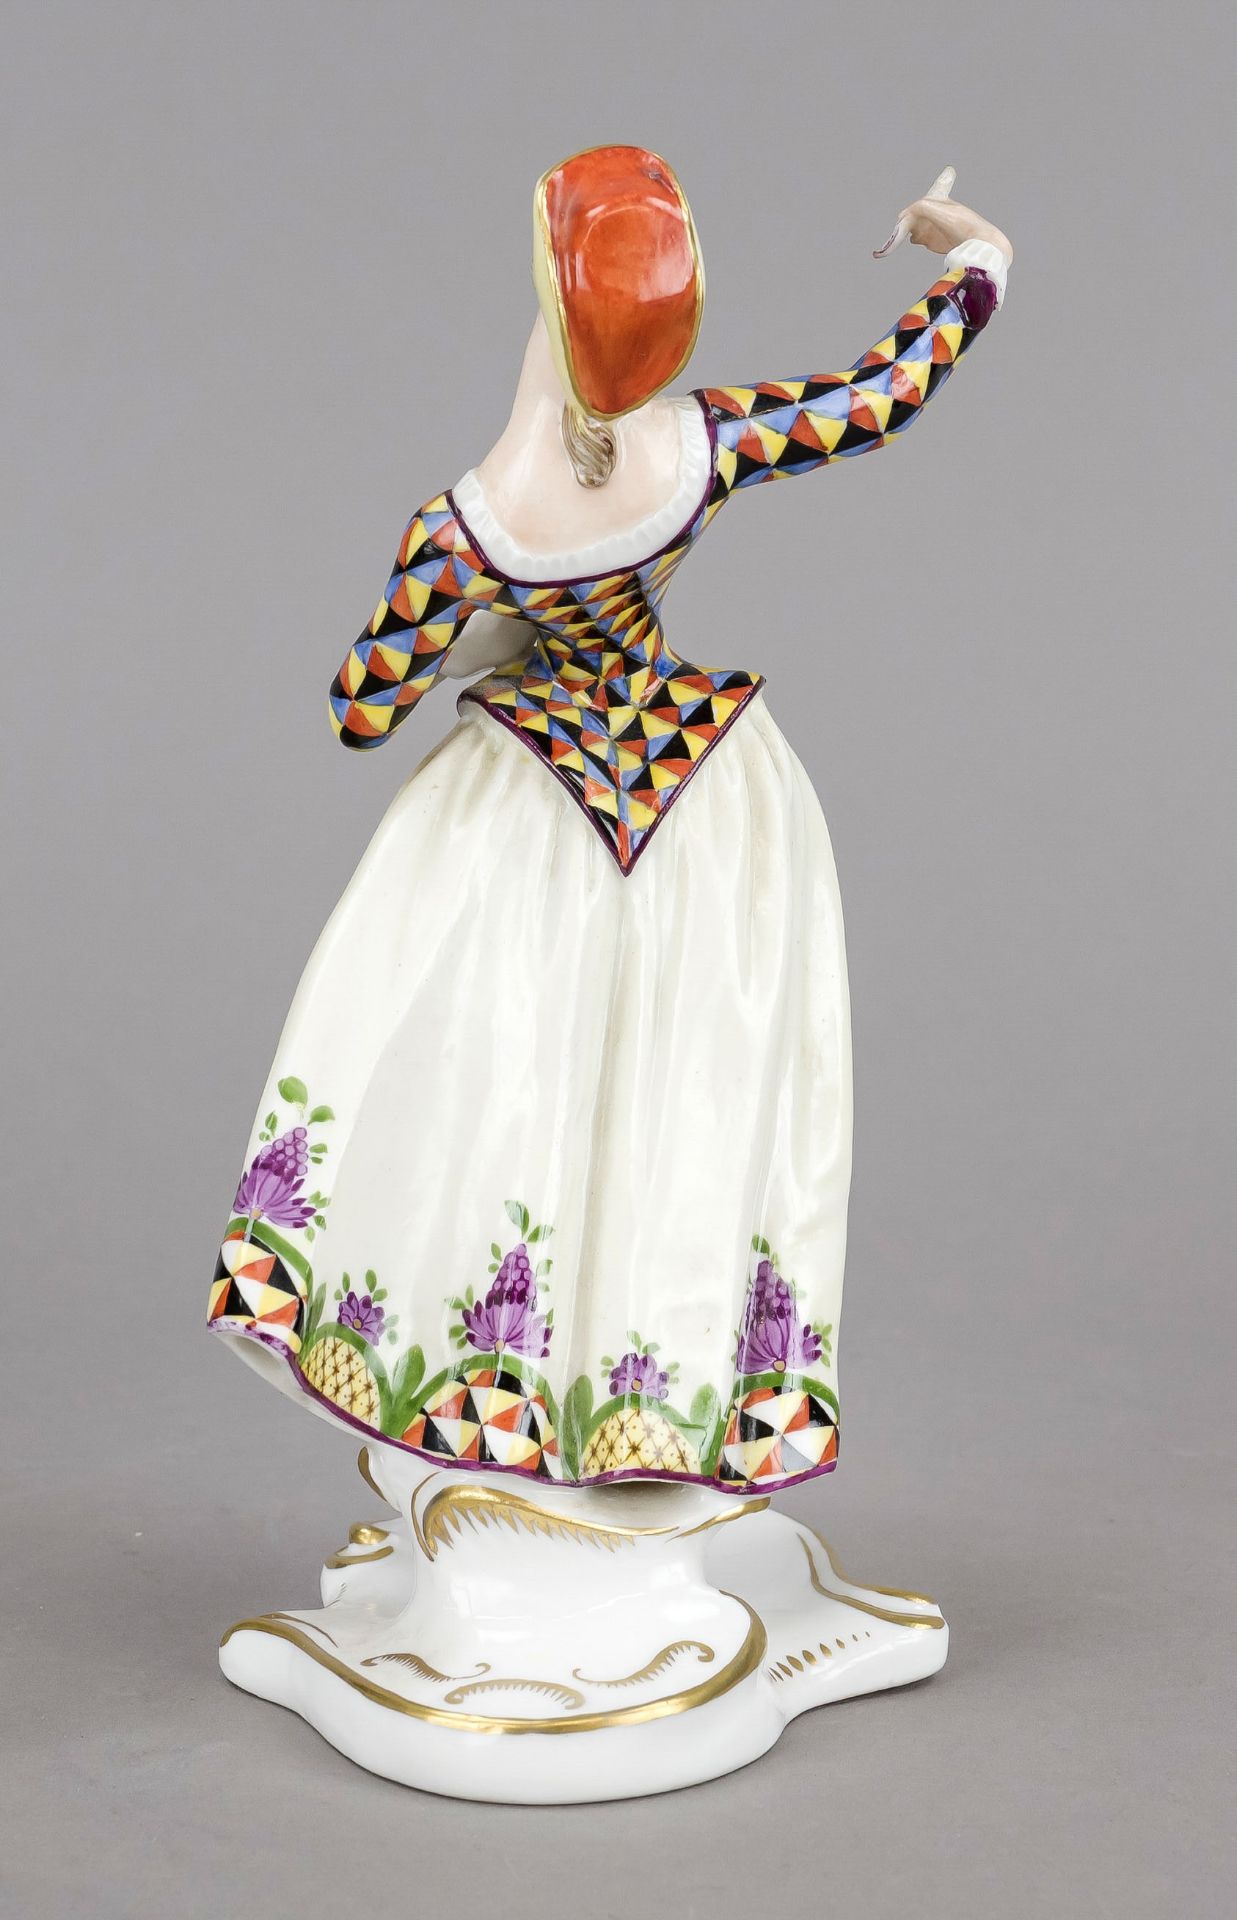 Lalage, Nymphenburg, early 20th century, a dancer holding a broad plate and spoon, from the - Image 2 of 2